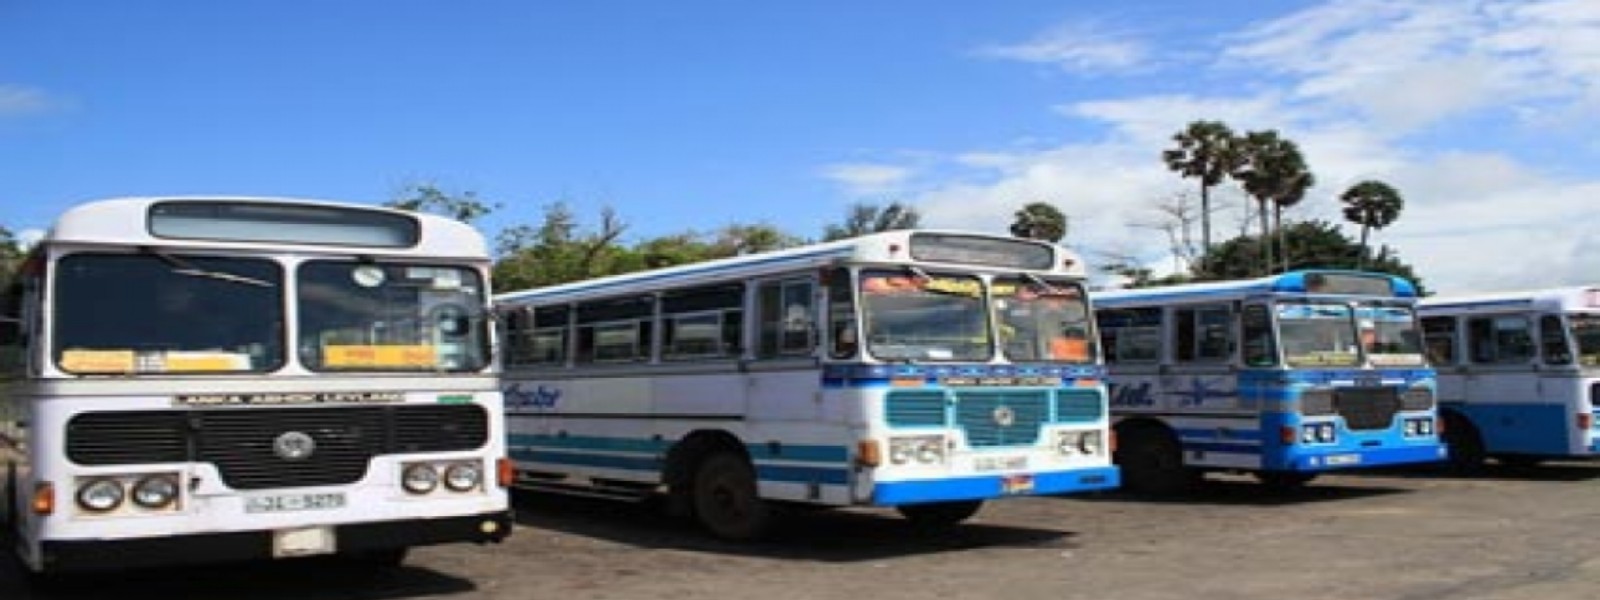 Private buses to increase operations today (8)